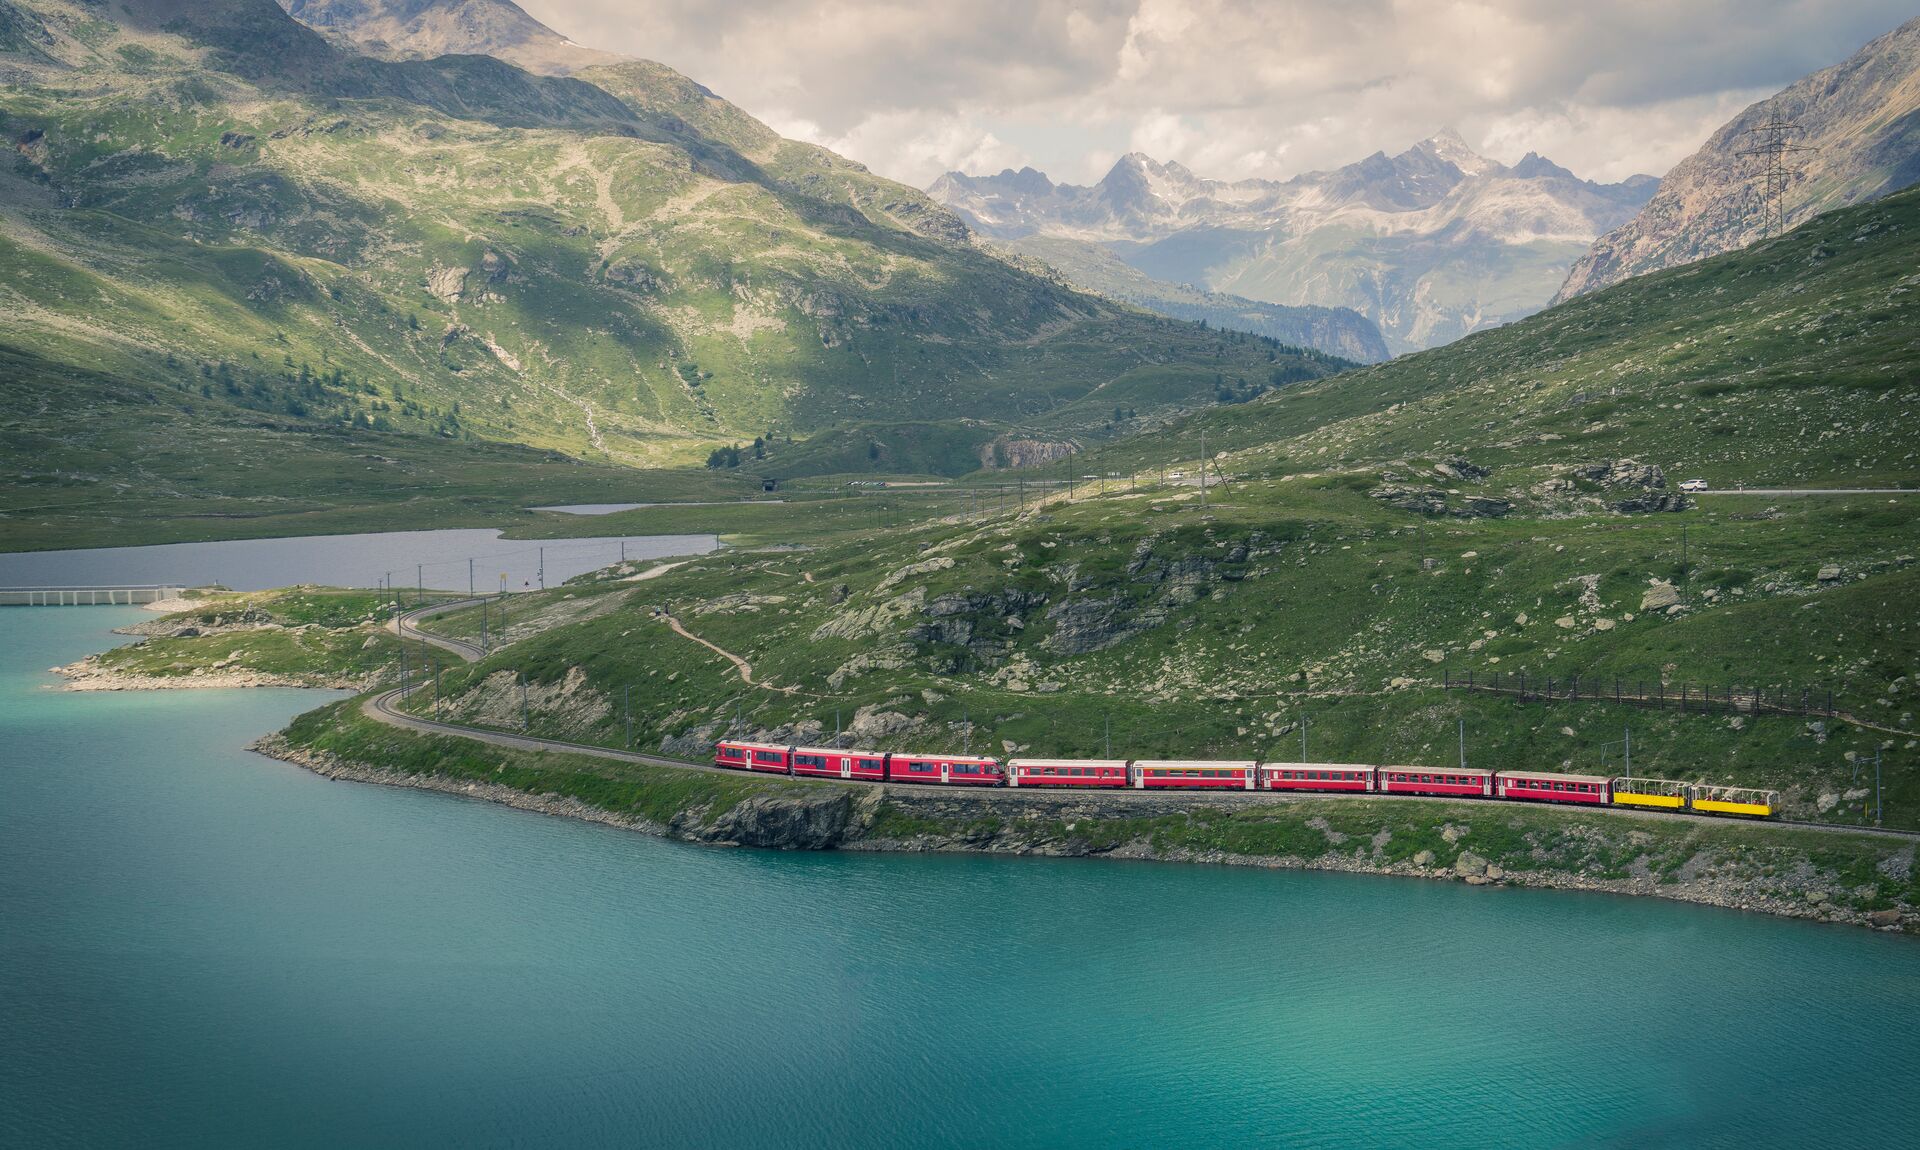 Glacier Express train winding past a glacial lake in Switzerland